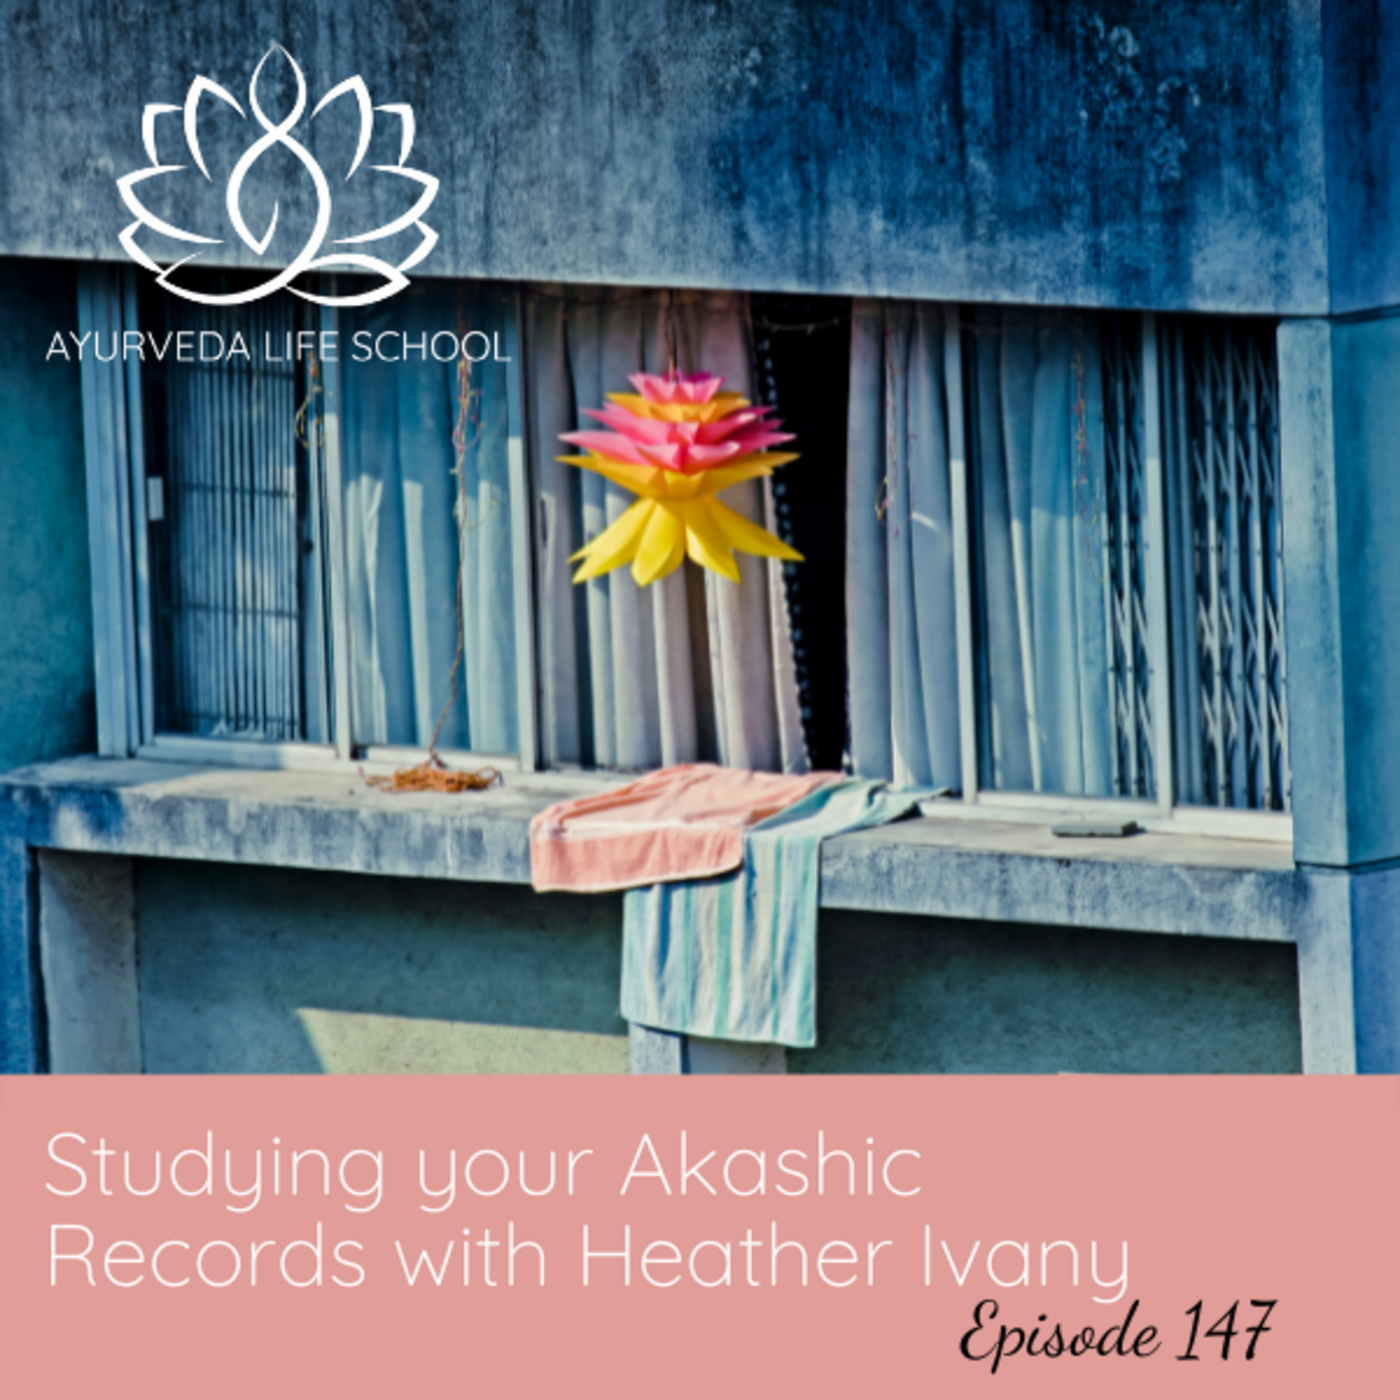 Episode 148: Ep #148: Studying Your Akashic Record with Heather Ivany